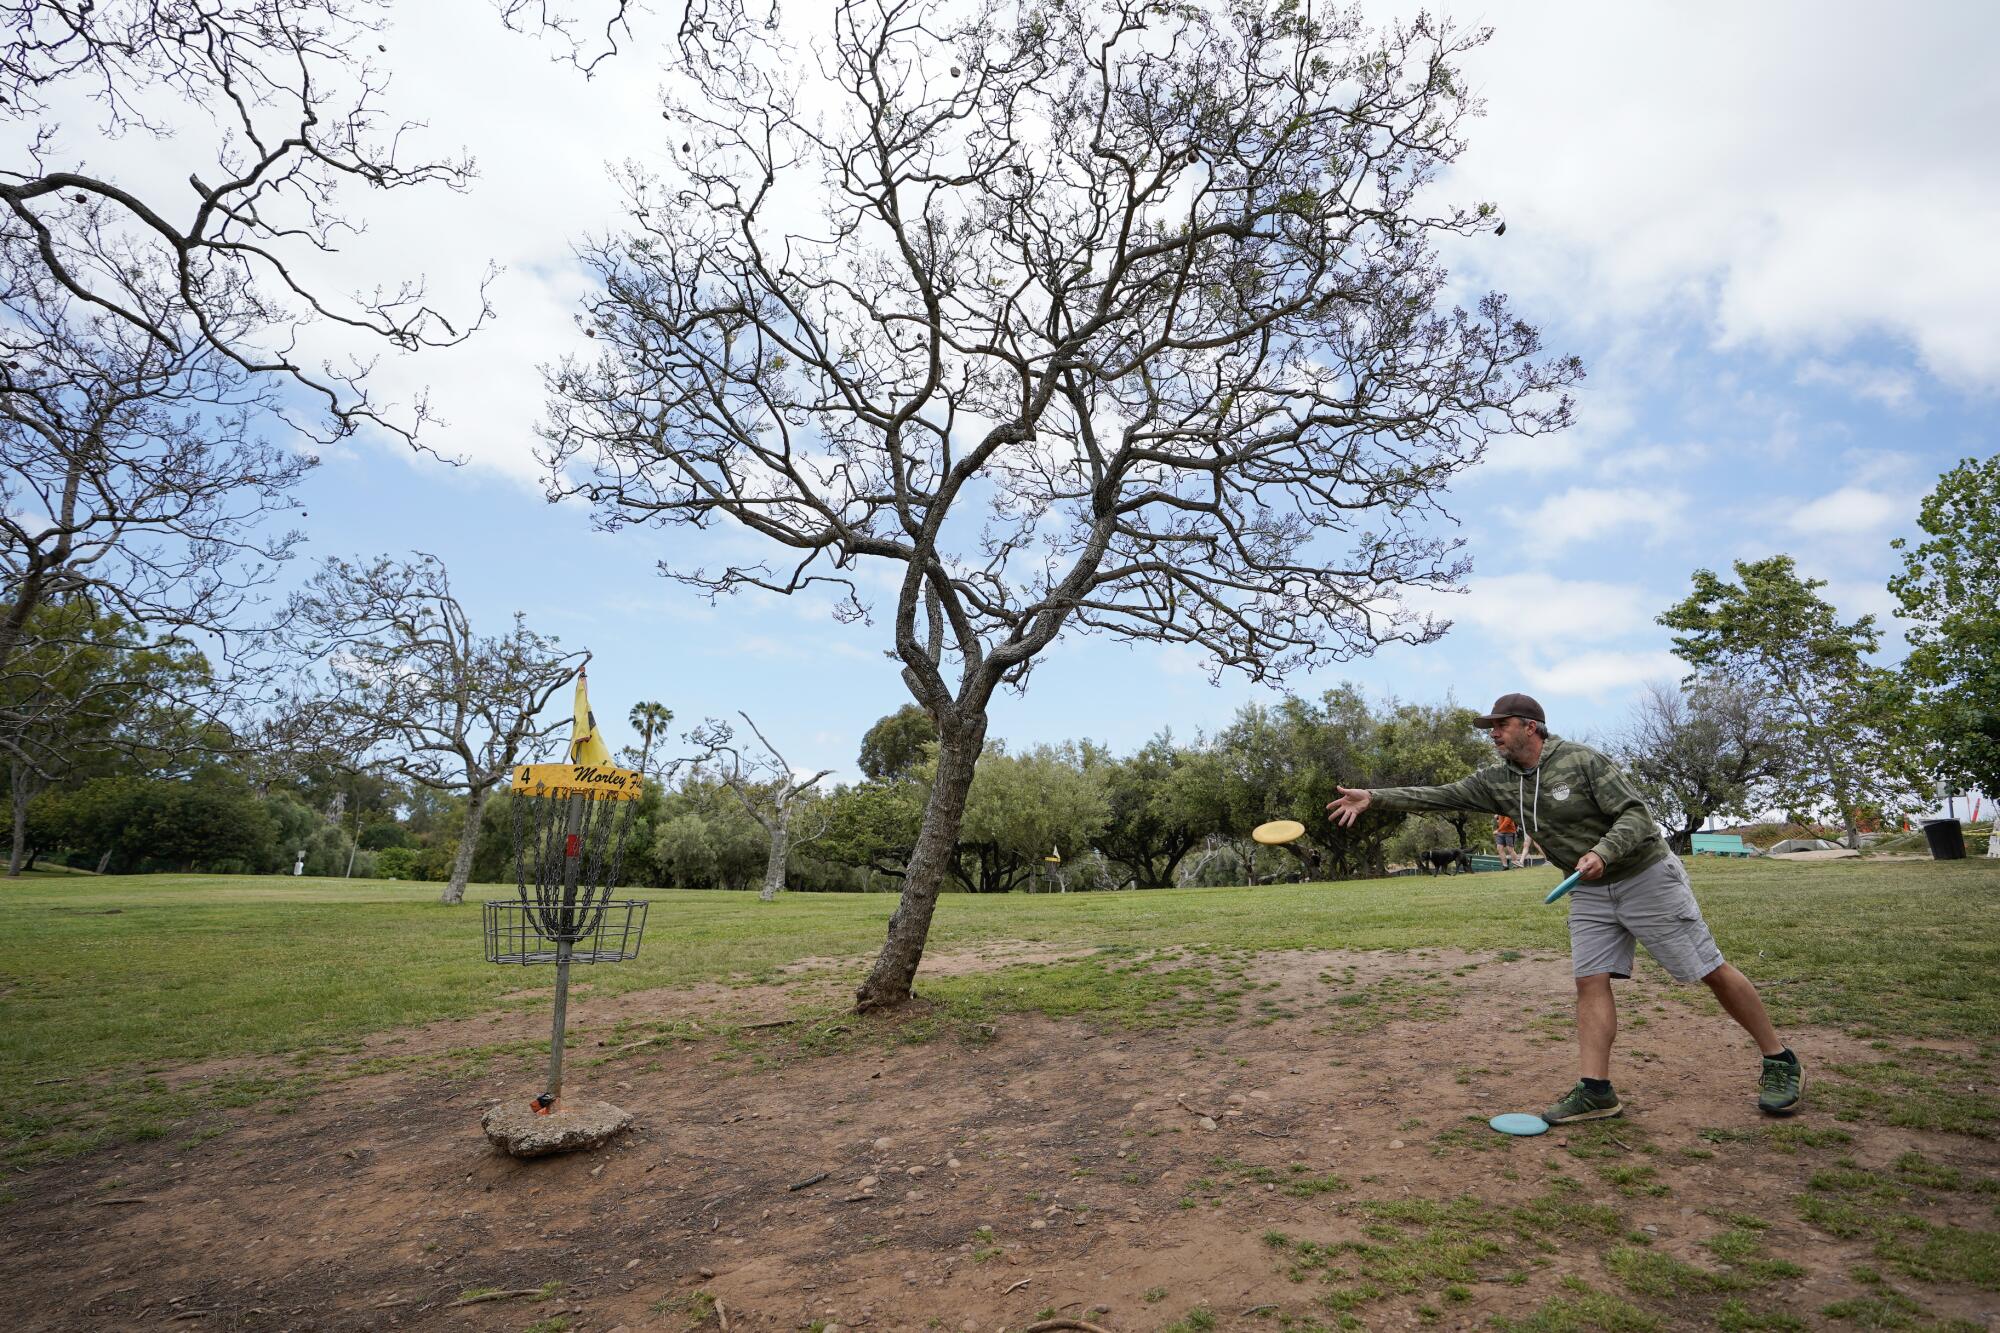 A man throws a disc at a target in a field, under a jacaranda tree whose branches remain mostly bare.